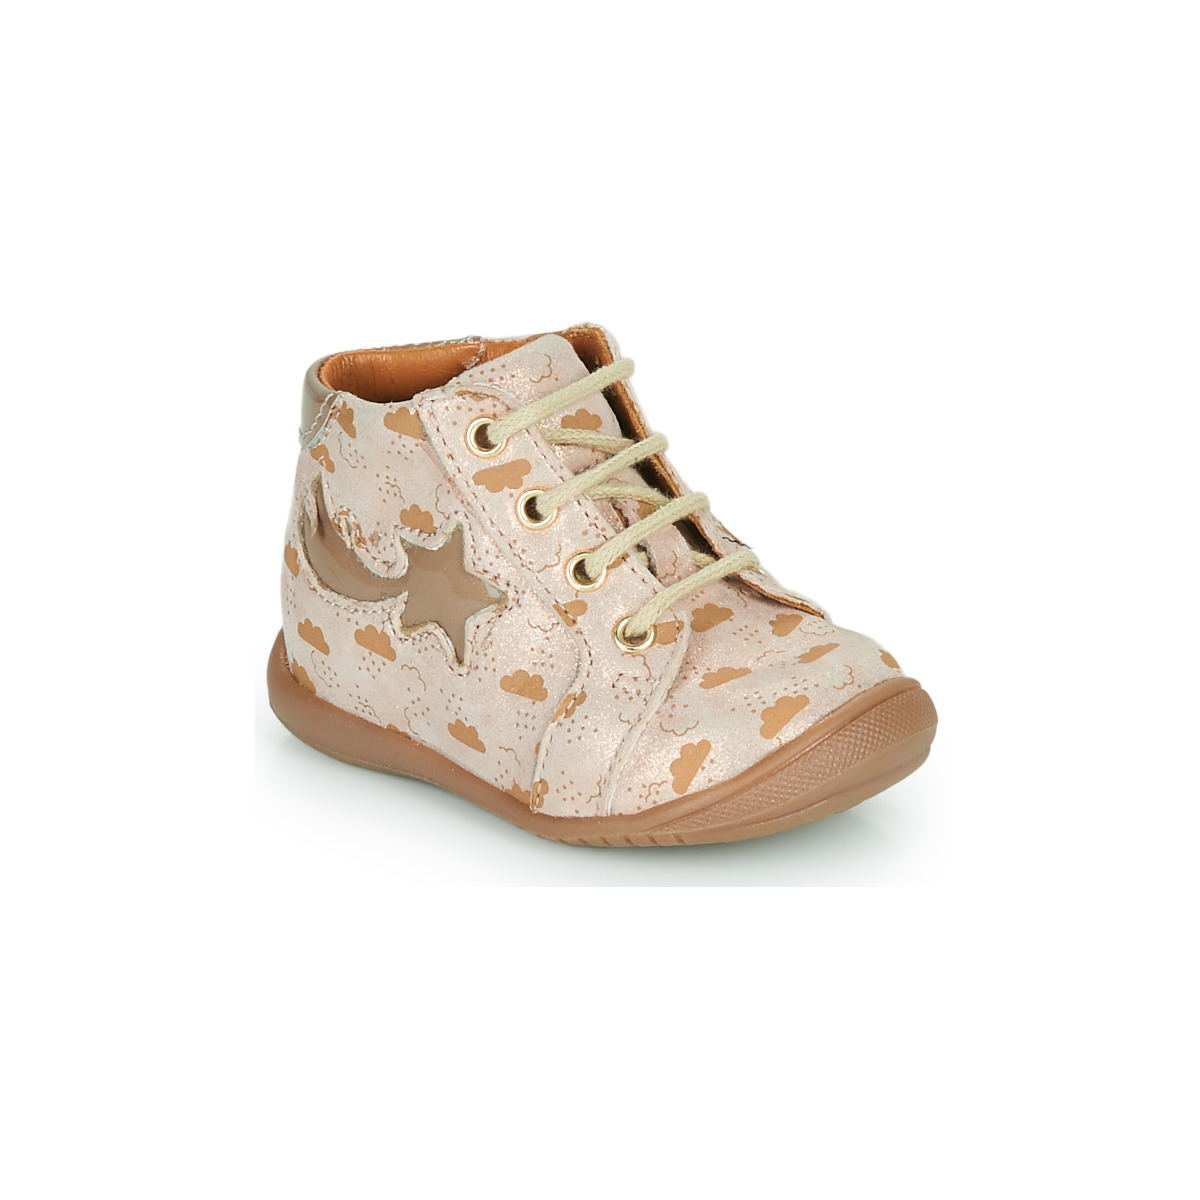 Shoes Girl High top trainers GBB POMME Beige